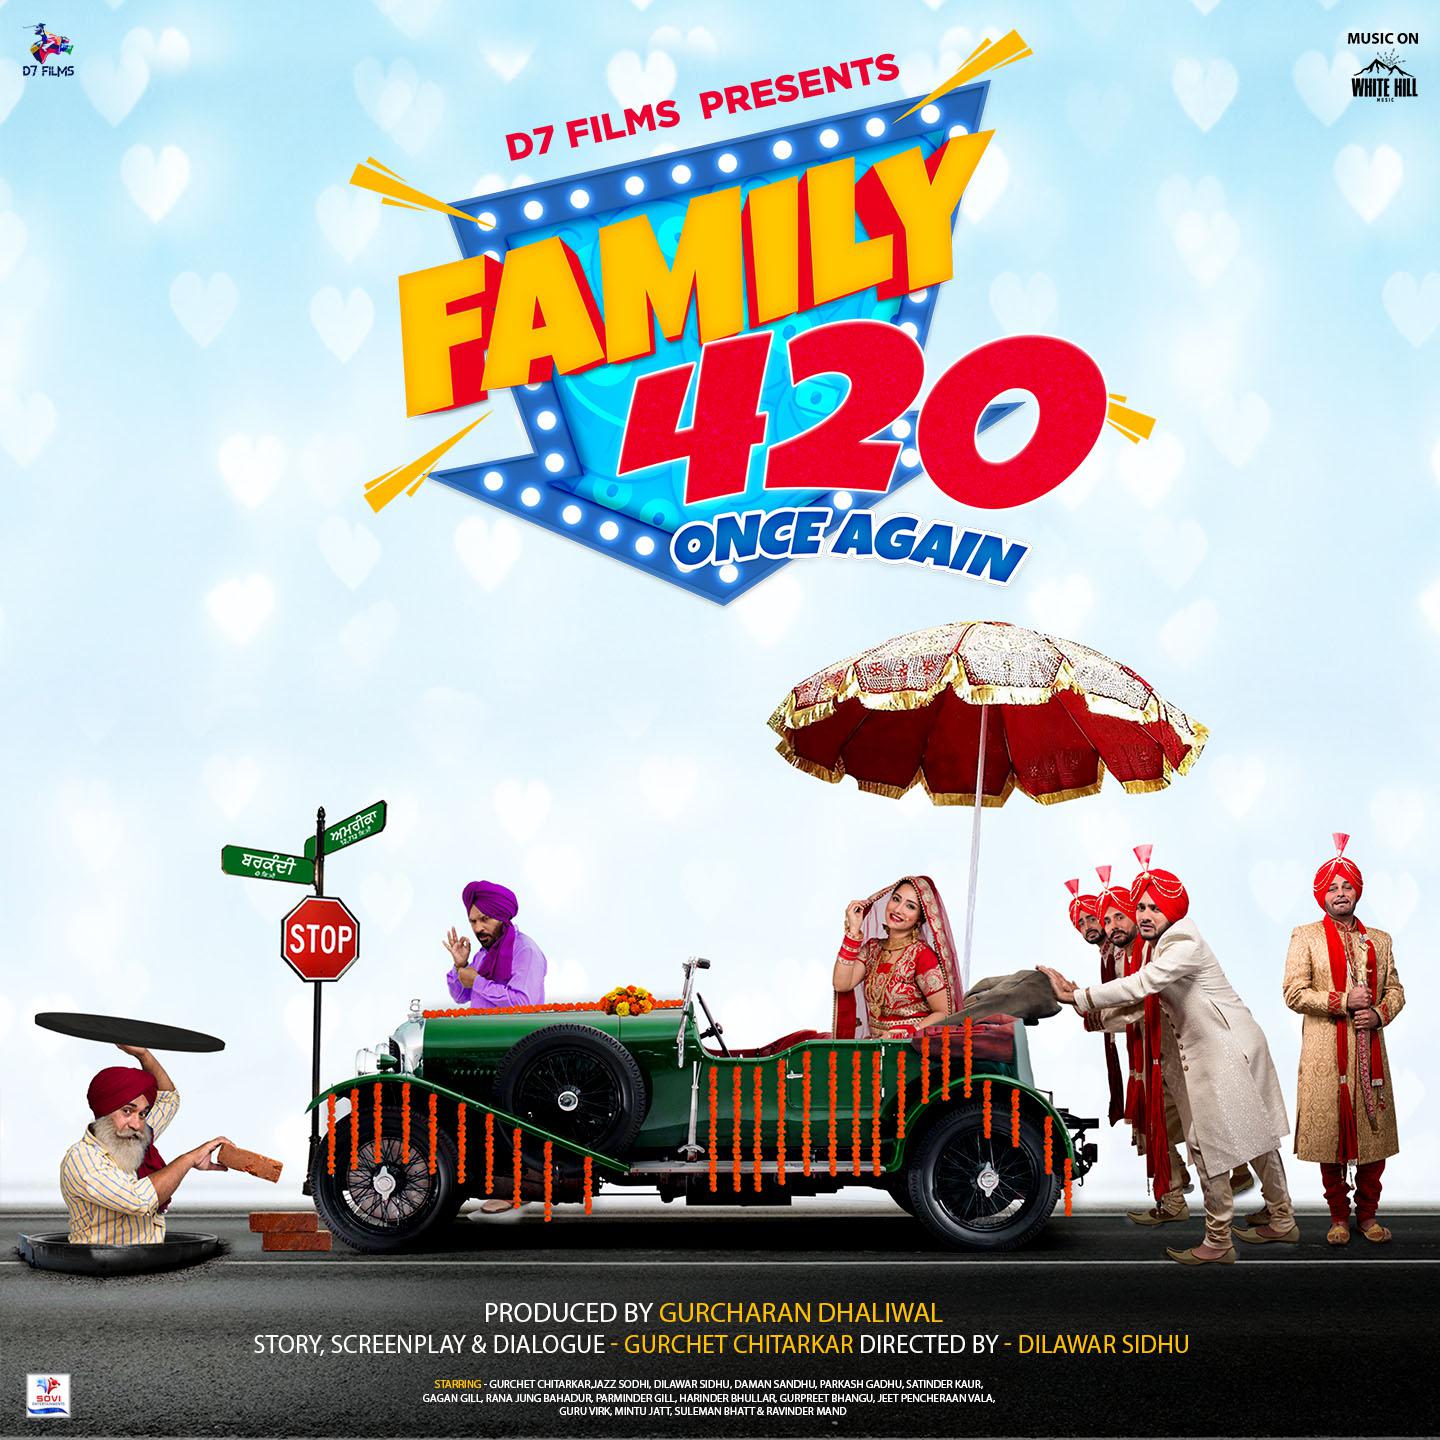 Family 420 Once Again (Original Motion Picture Soundtrack)